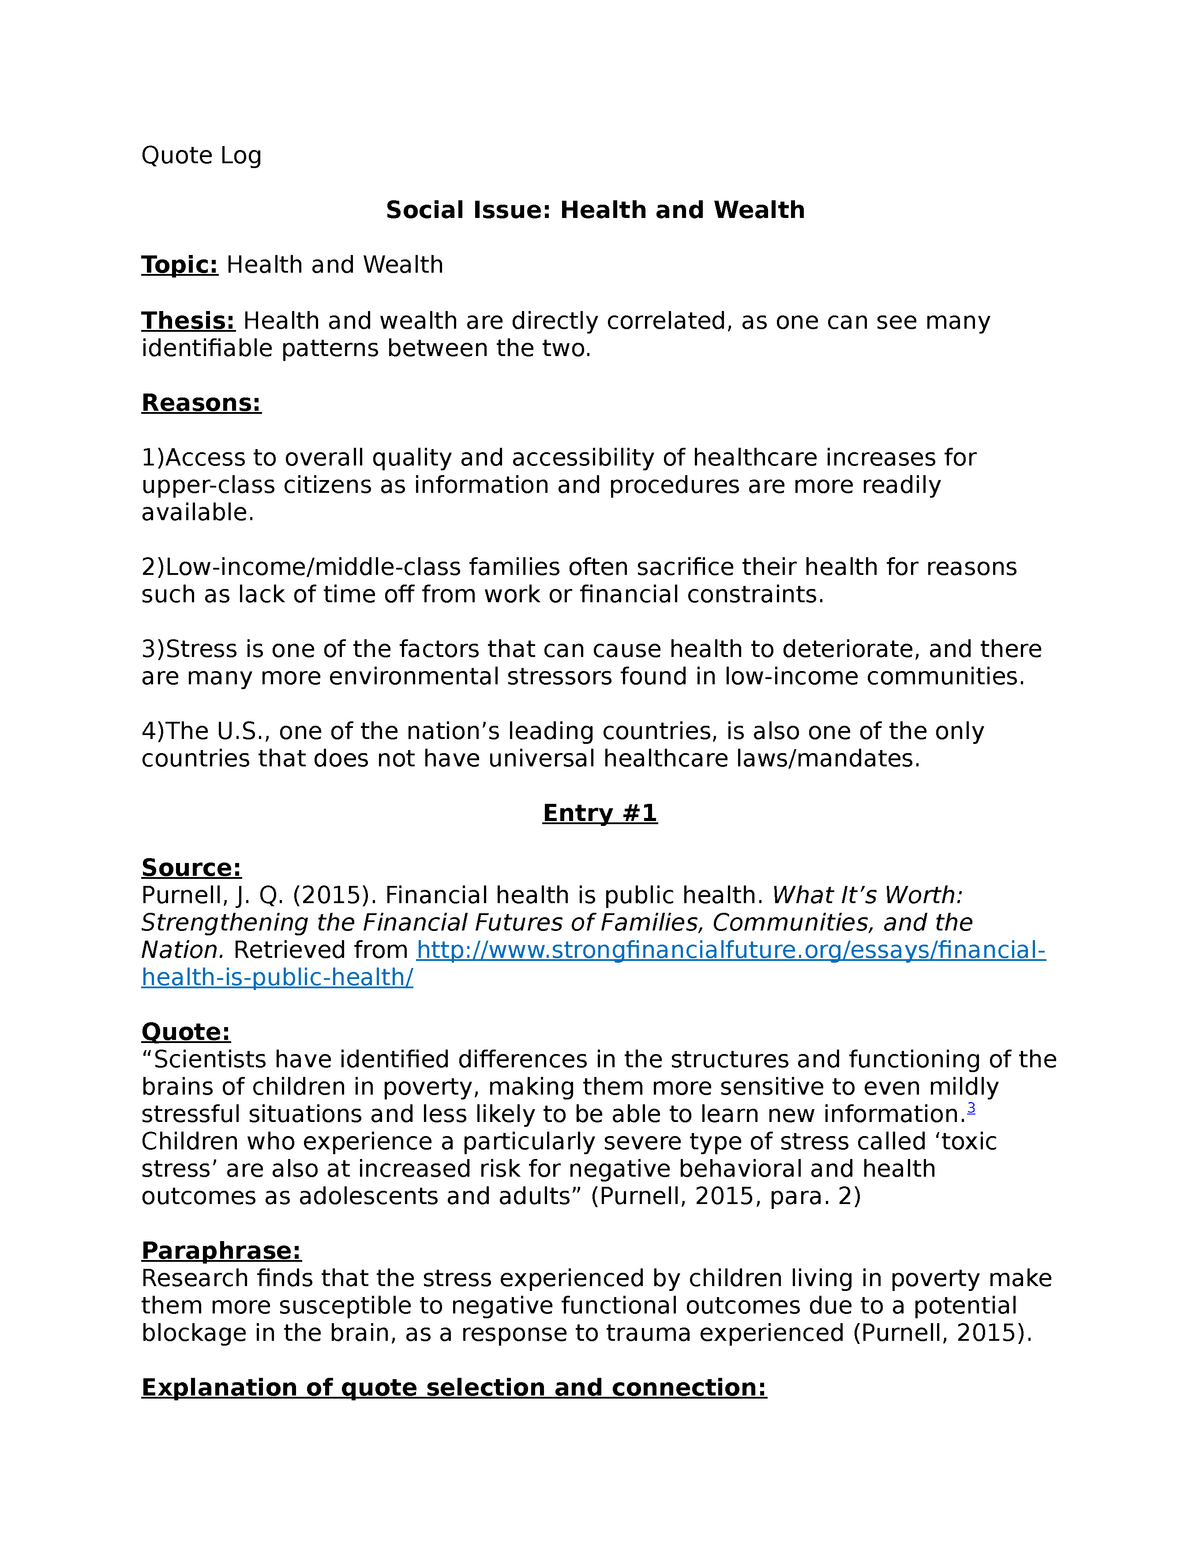 thesis on health and wealth